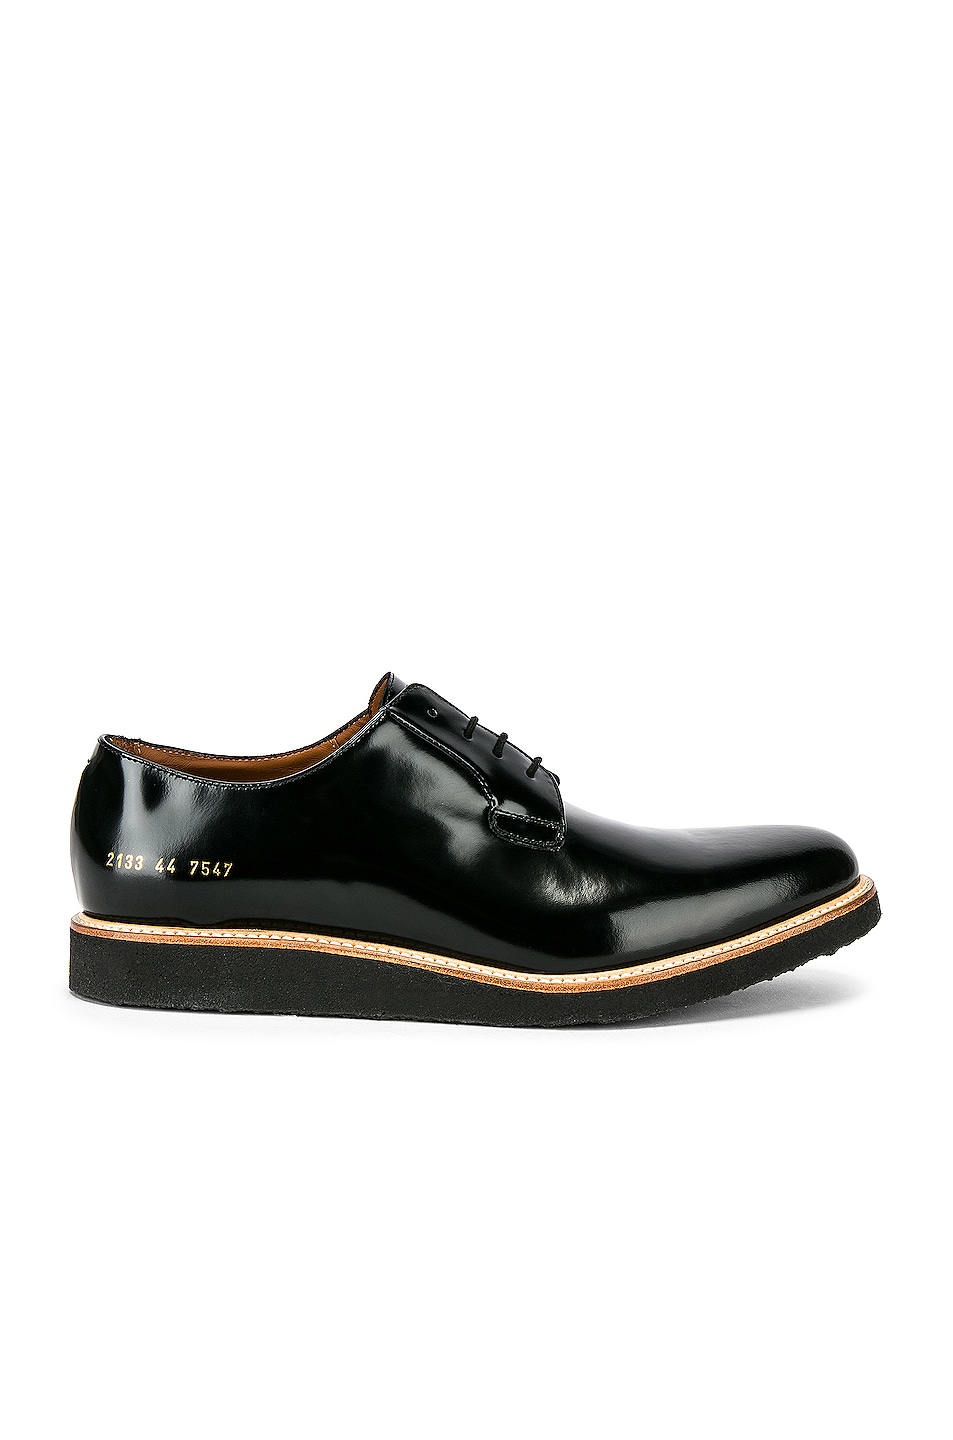 COMMON PROJECTS RAISED-SOLE LACE-UP LEATHER DERBY SHOES, BLACK | ModeSens